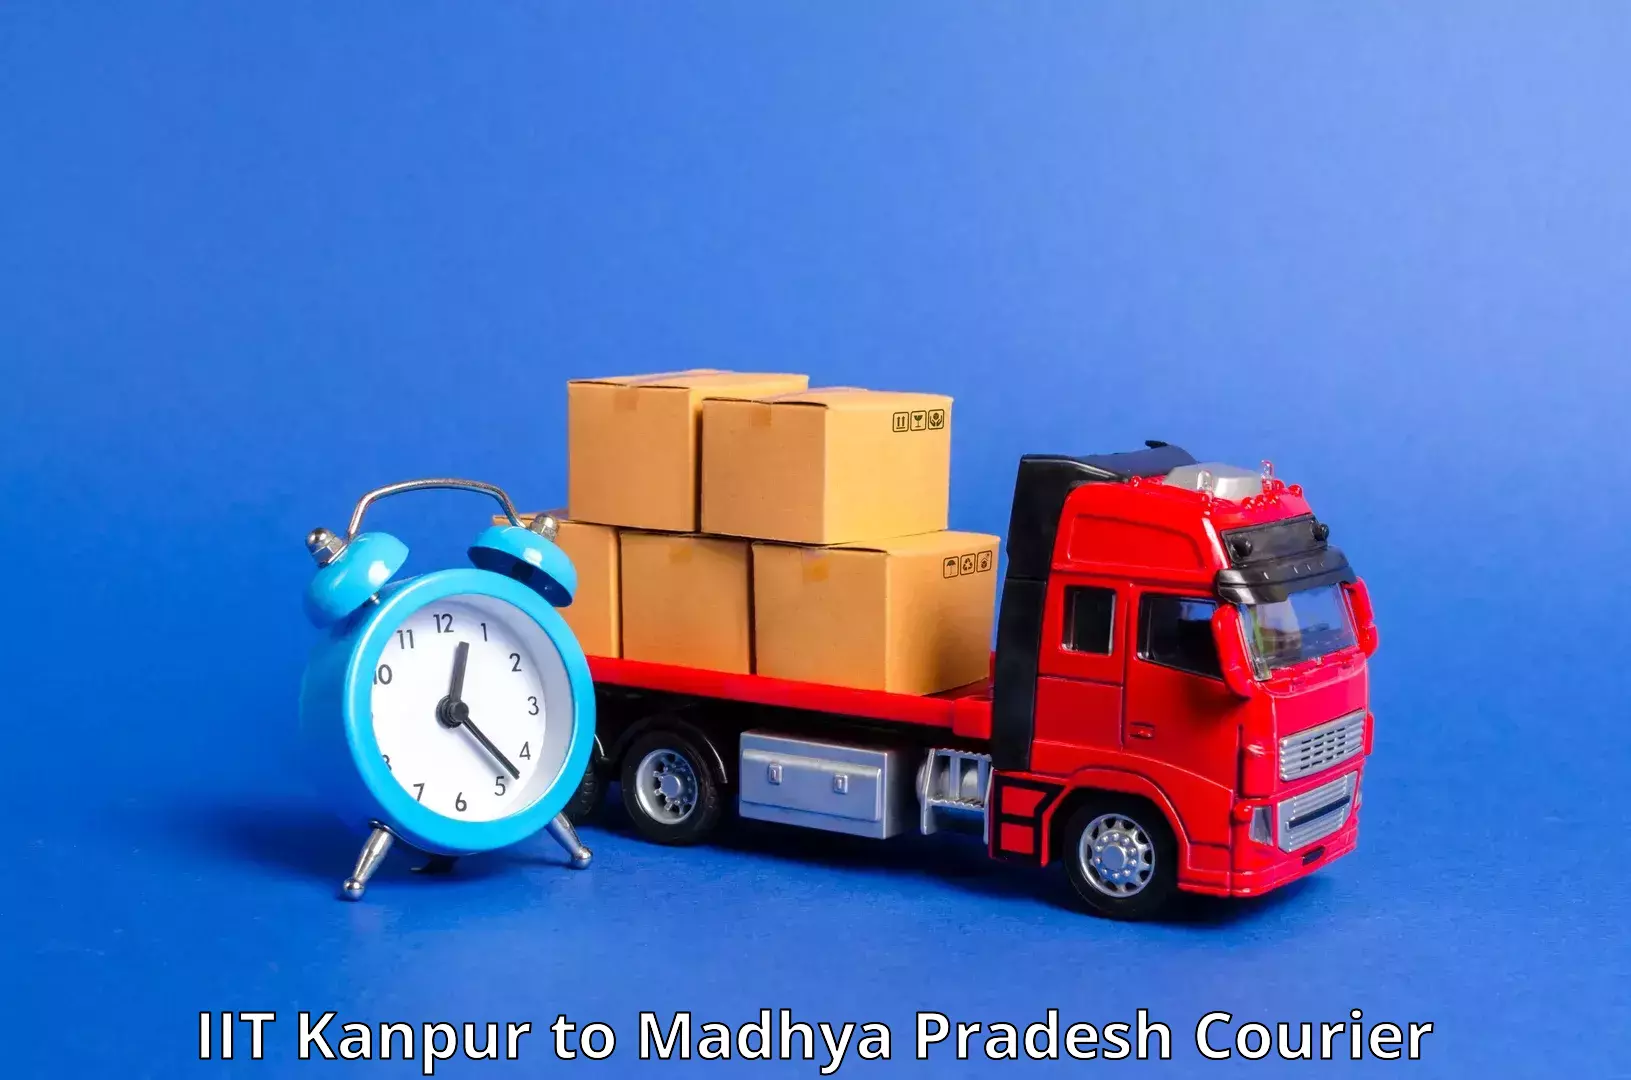 Parcel service for businesses IIT Kanpur to Semariya